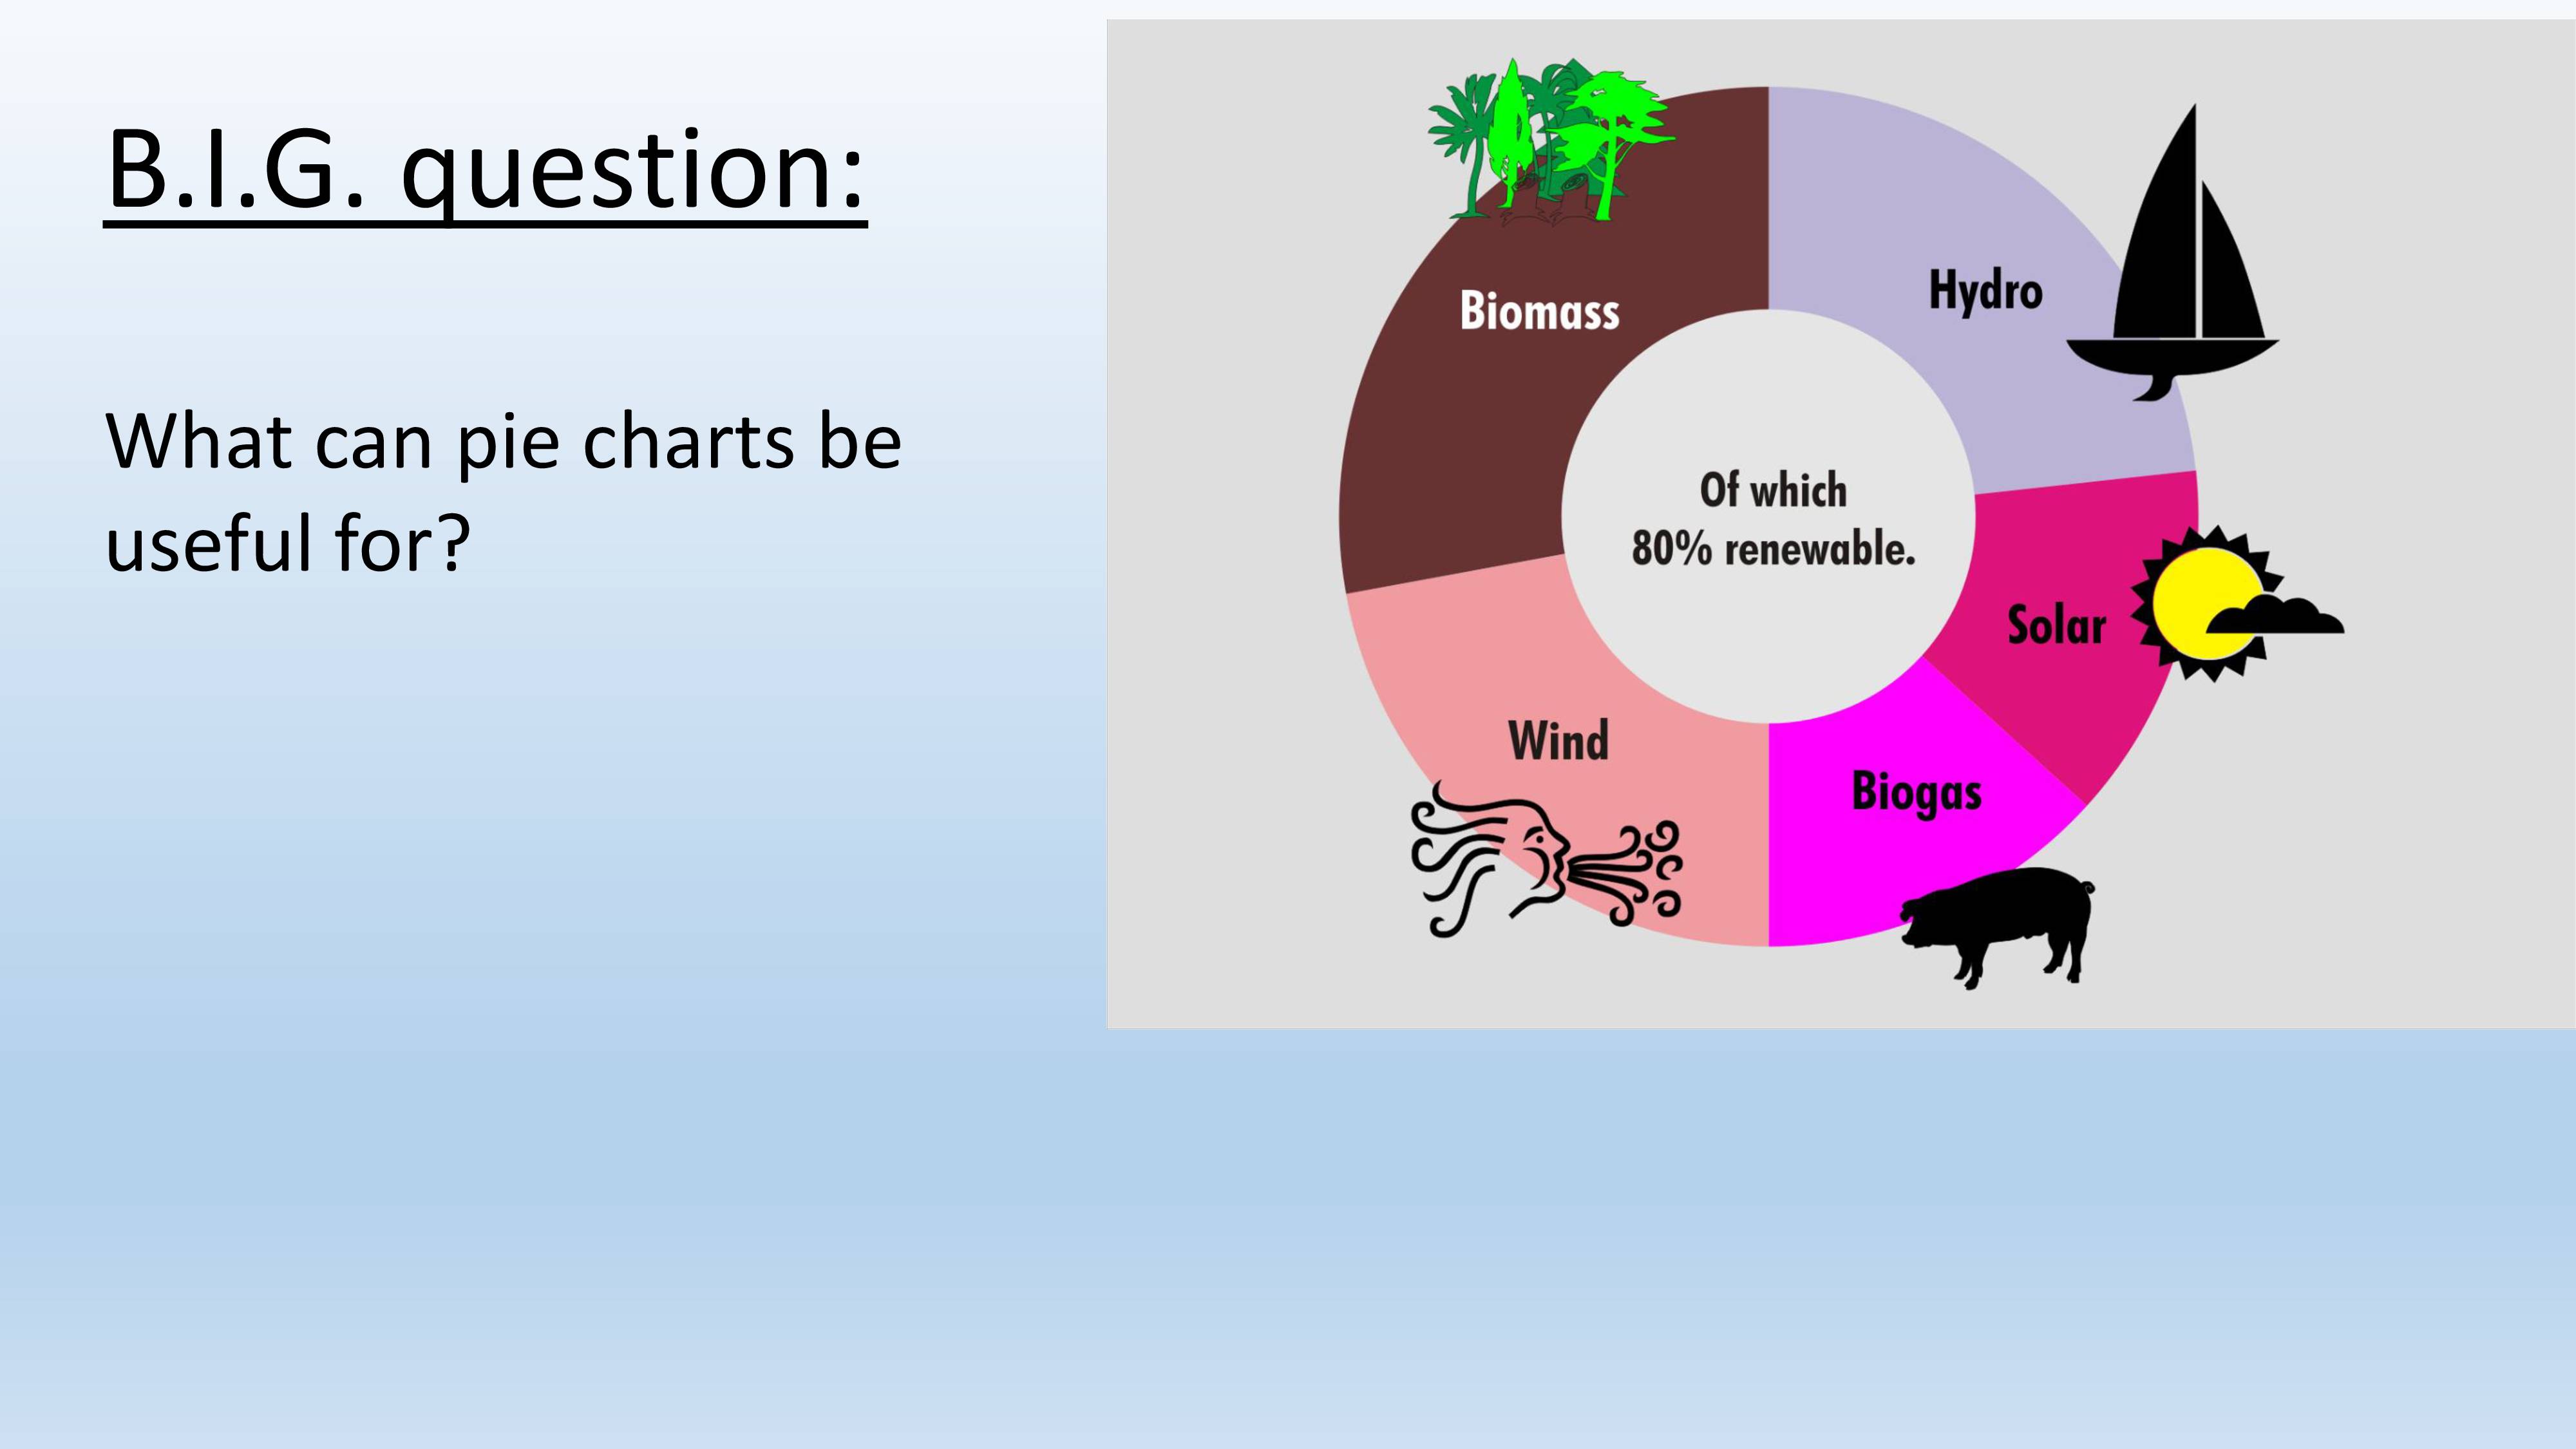 PPT on Pie charts